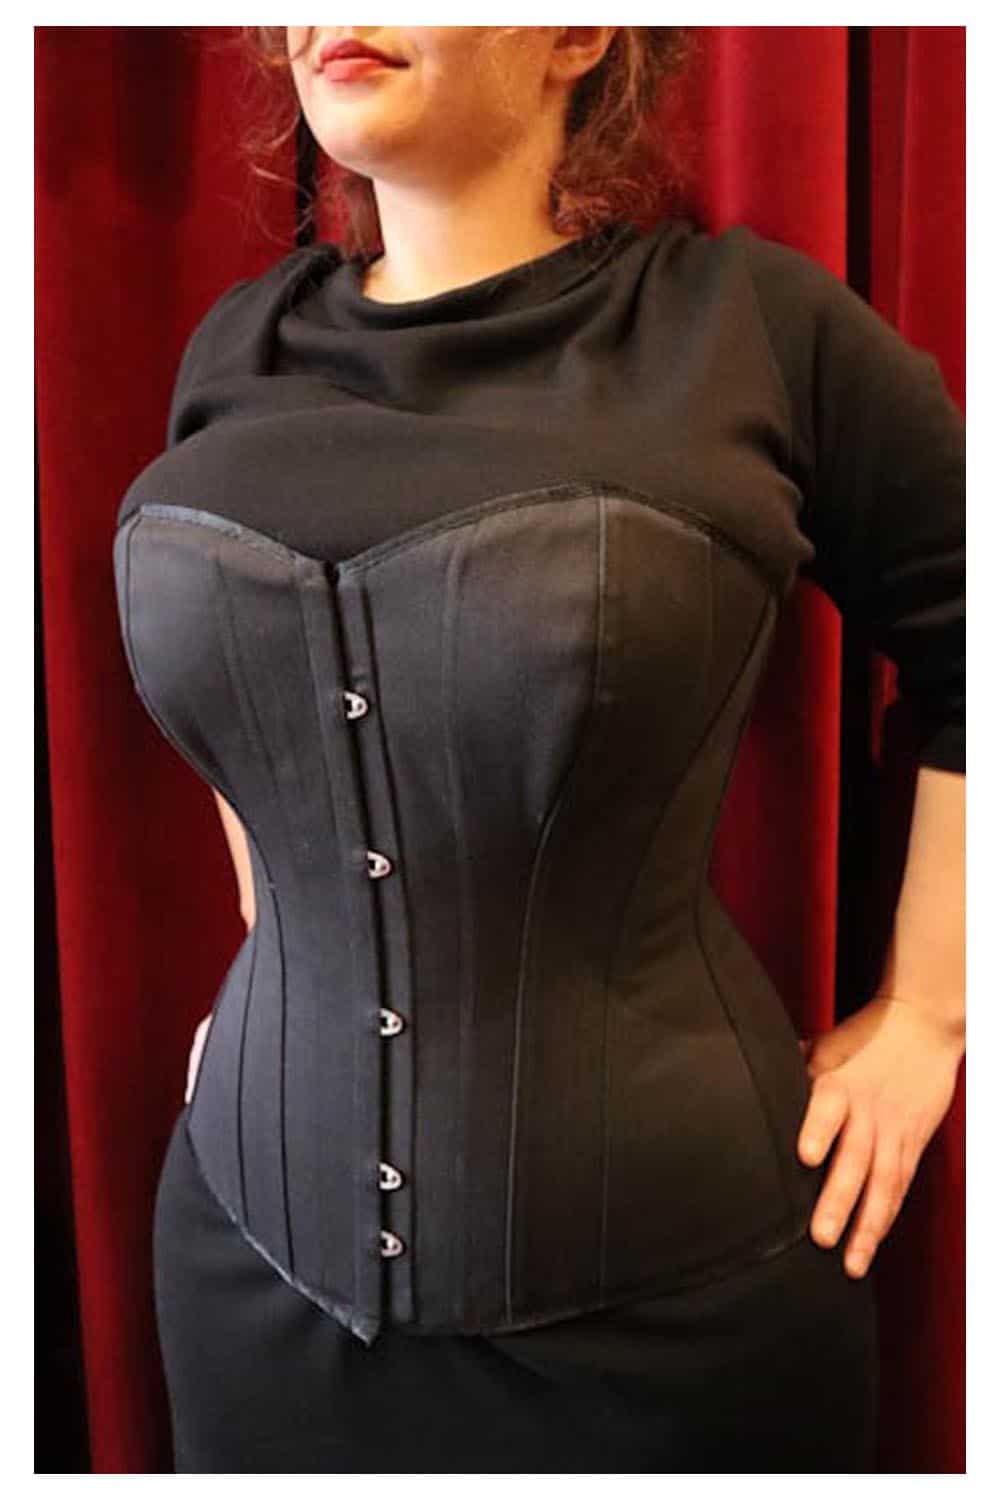 Buy TRANSPARENT LACY BLACK CURVED CORSET for Women Online in India